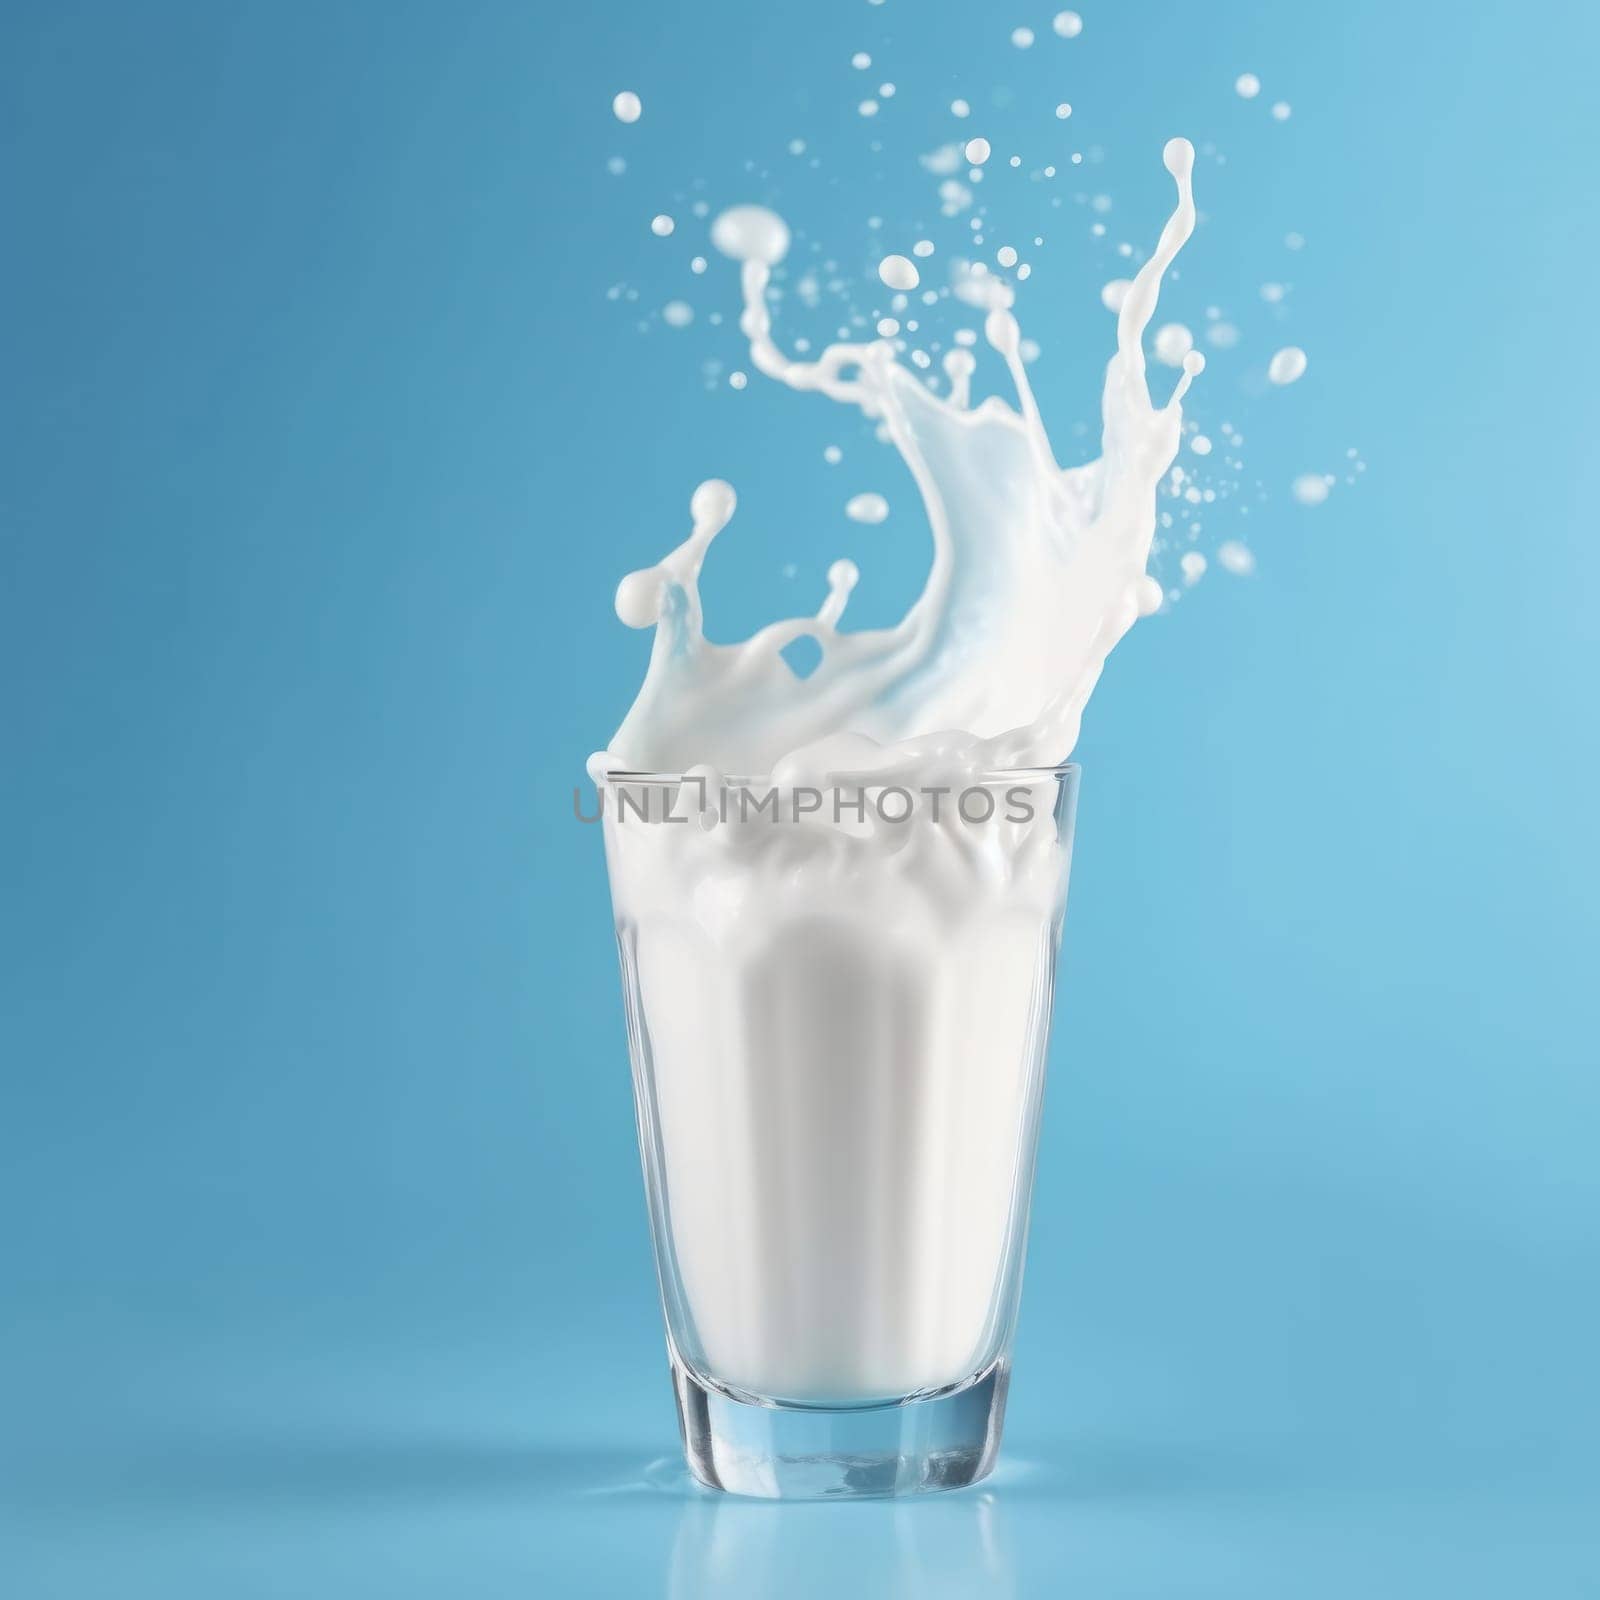 Milk splashing on a blue surface with artistic droplets by Sorapop